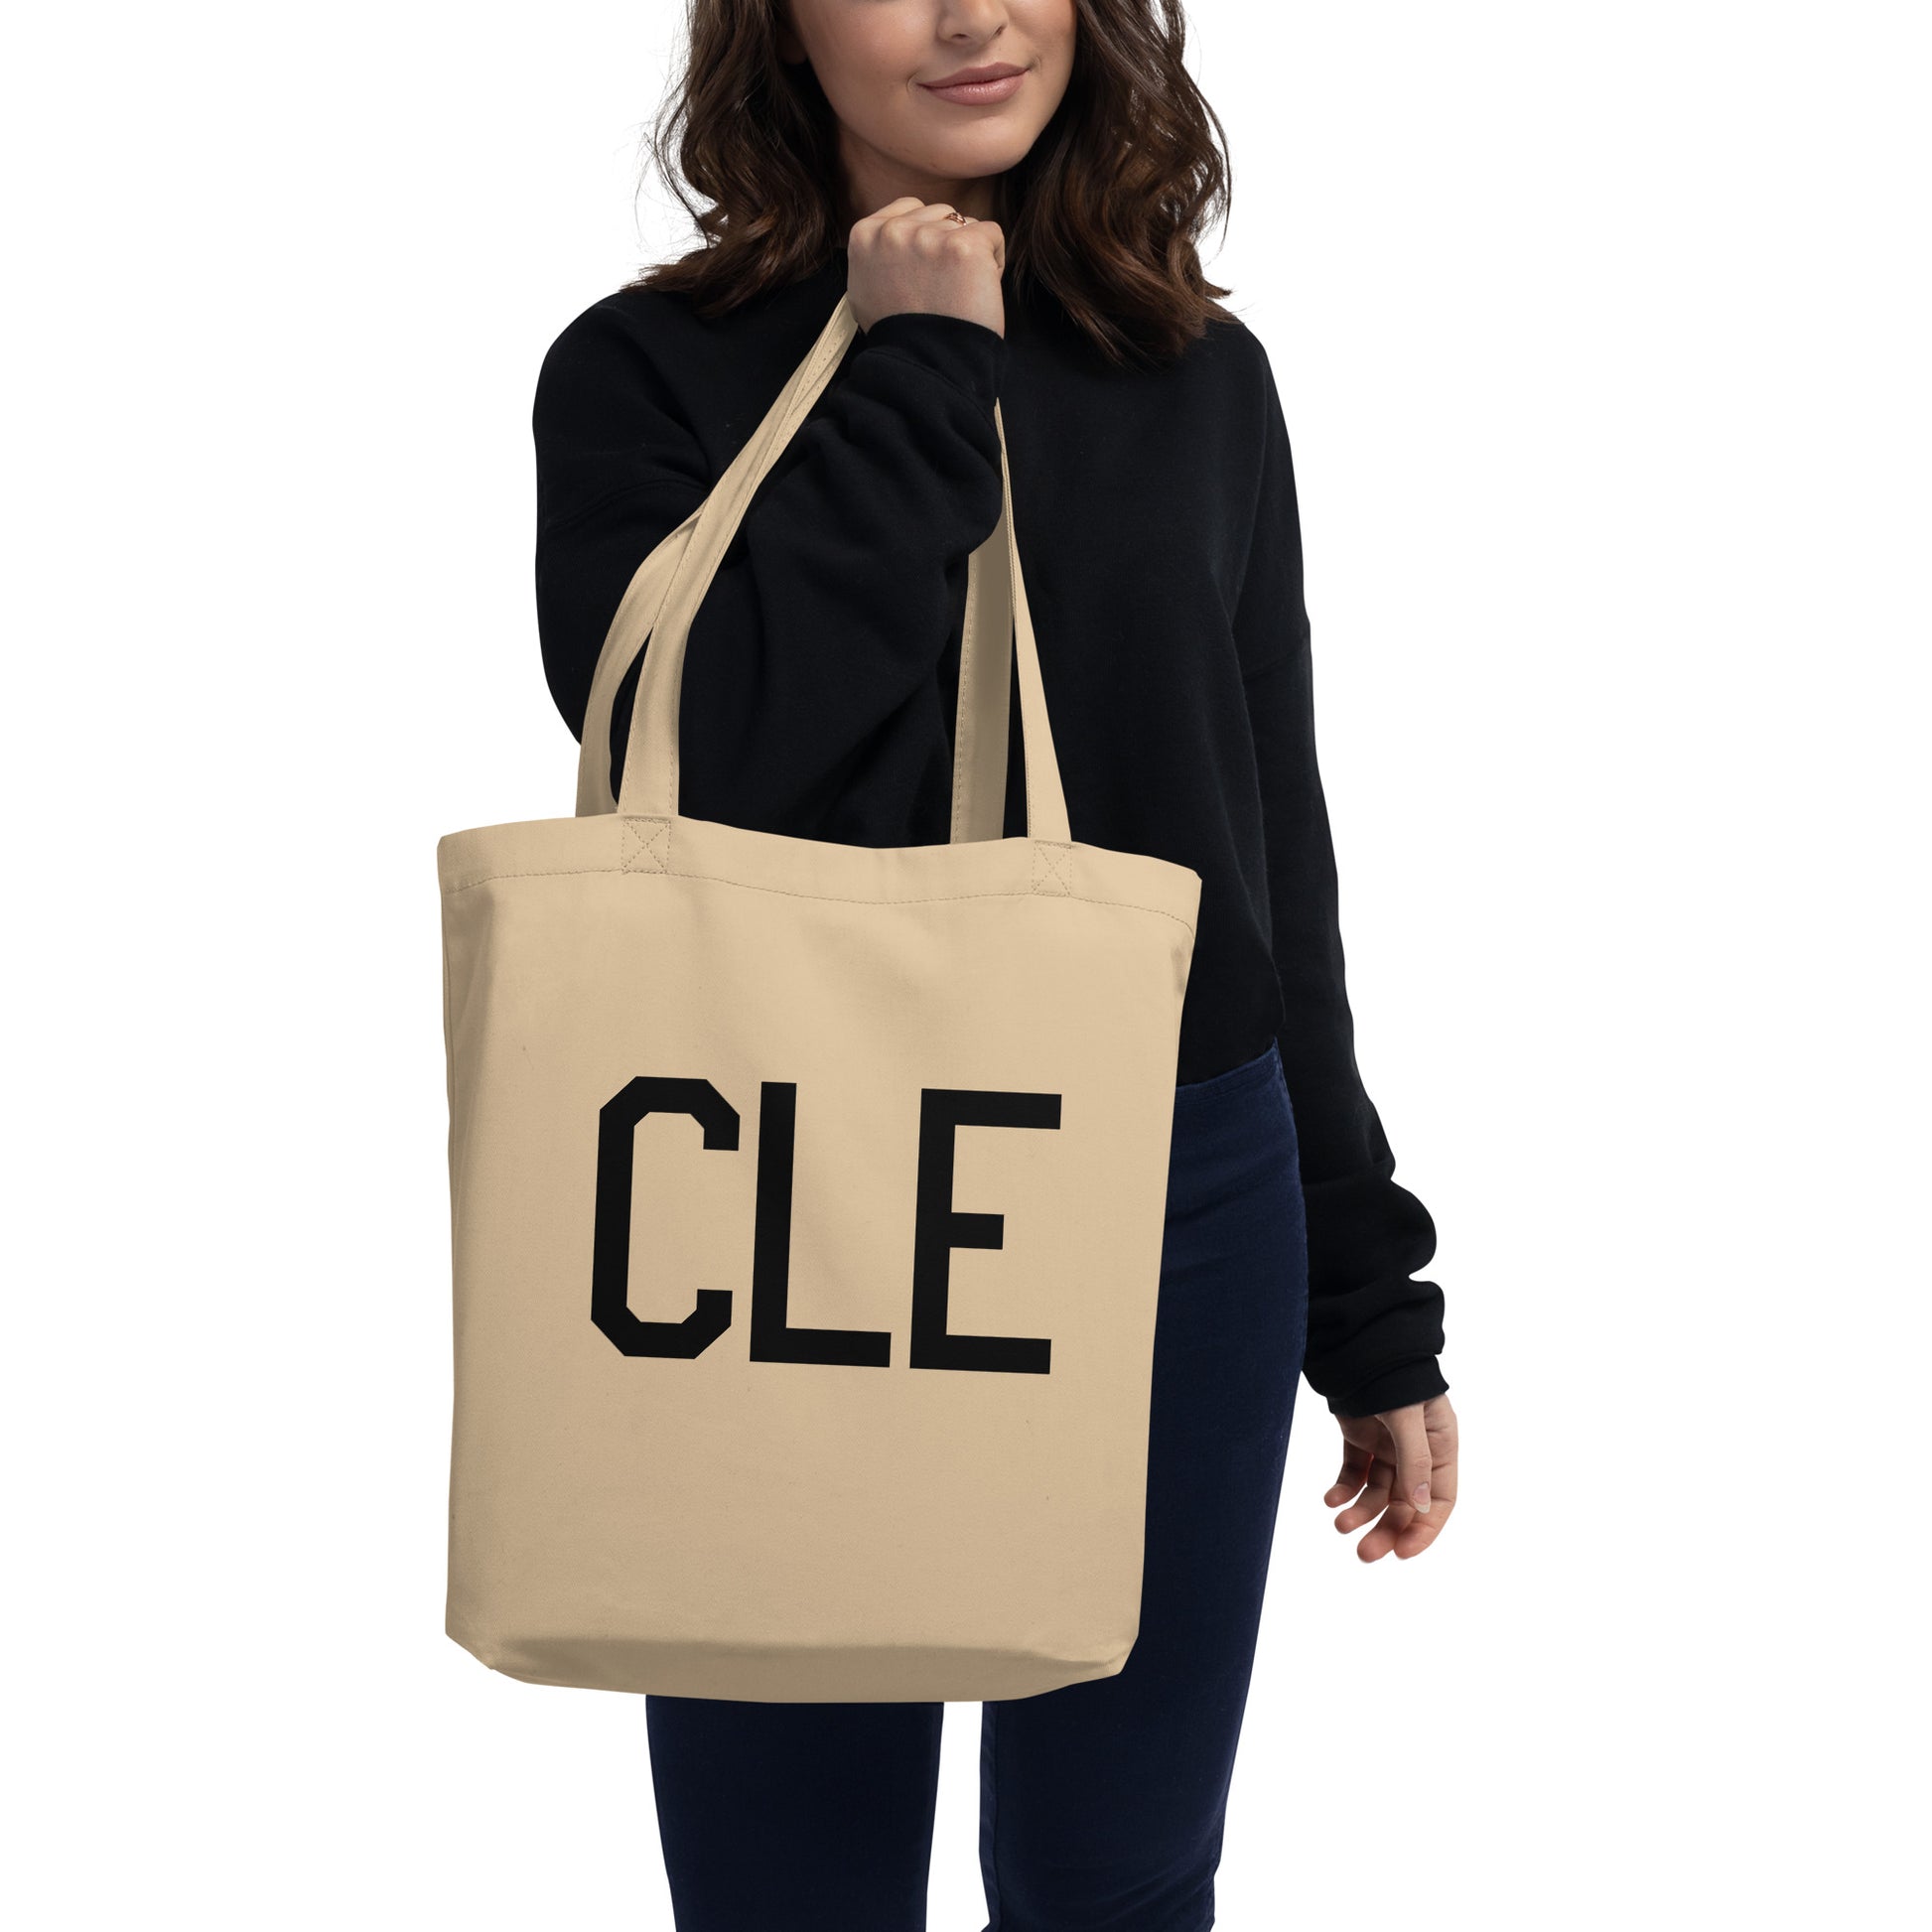 Aviation Gift Organic Tote - Black • CLE Cleveland • YHM Designs - Image 03